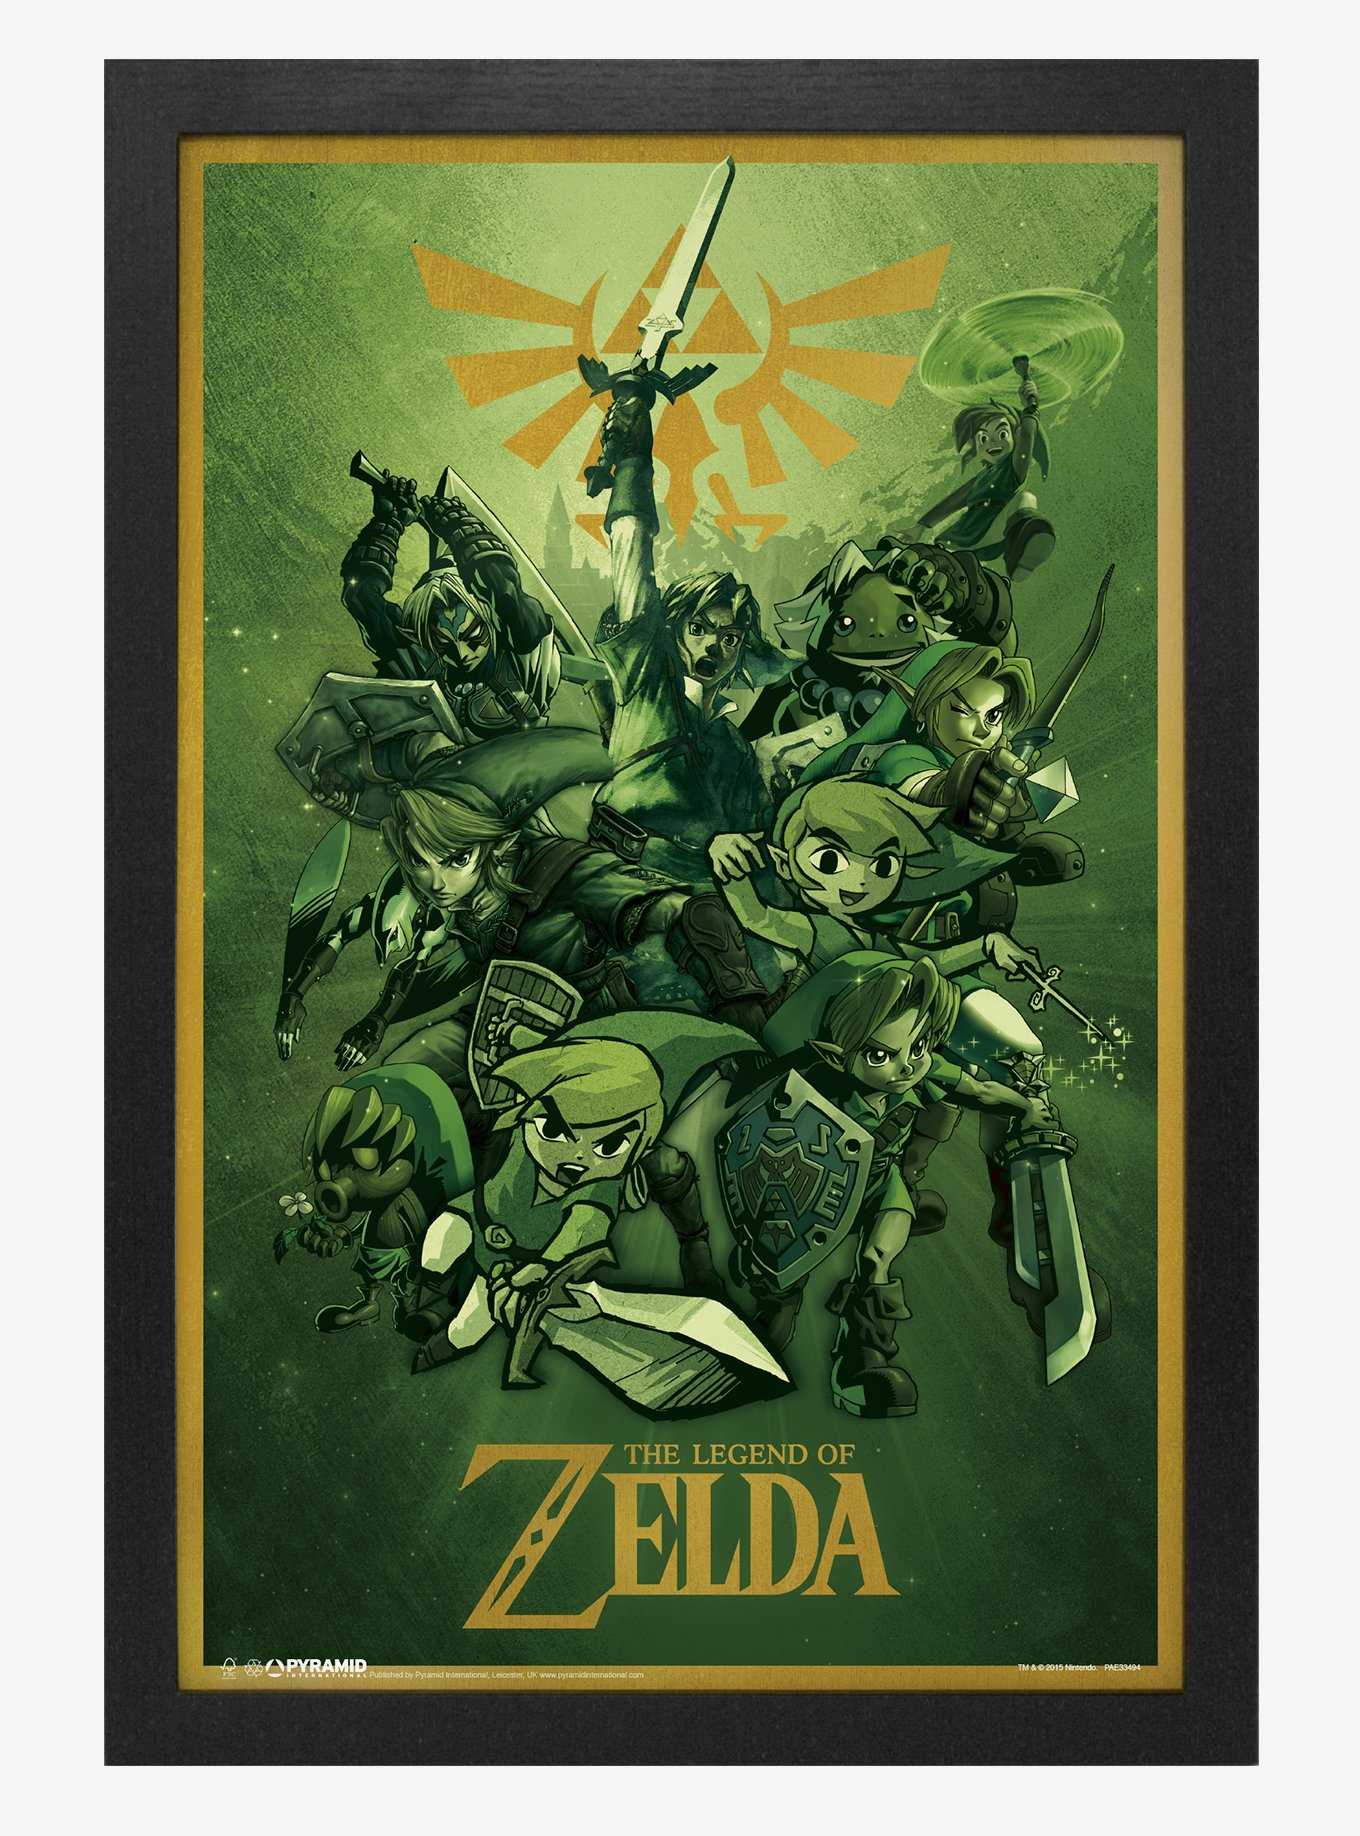 The Legend of Zelda “Skyward Sword” 1,000 Piece Jigsaw Puzzle | Collectible  Puzzle Artwork Featuring Link, Ghirahim, and Fi | Officially-Licensed